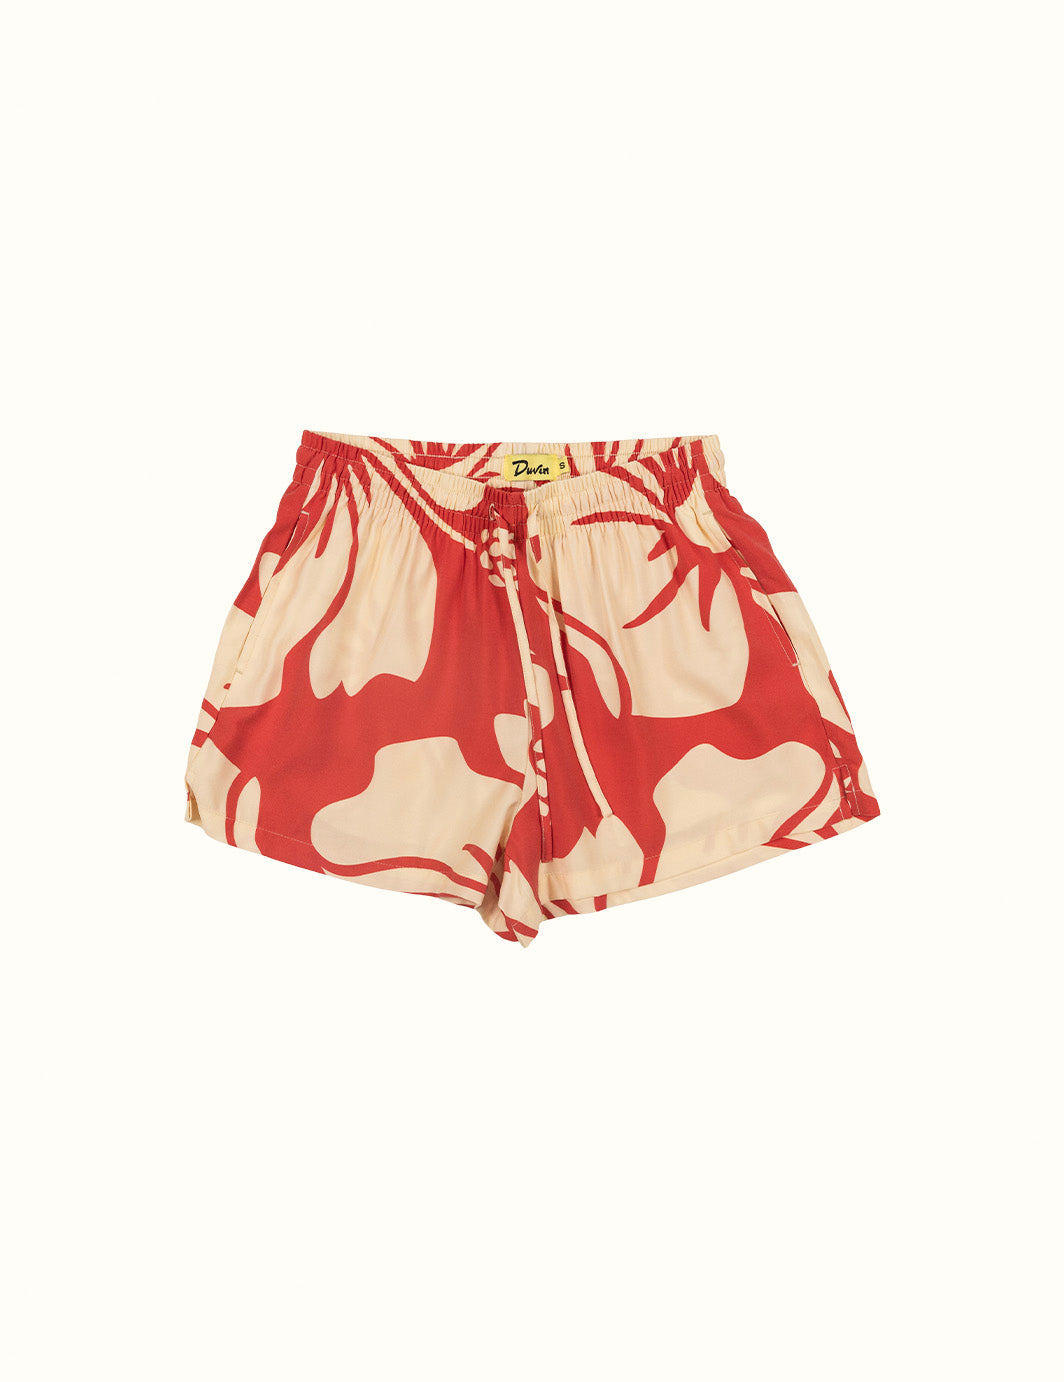 Trouble In Paradise Women's Shorts Red